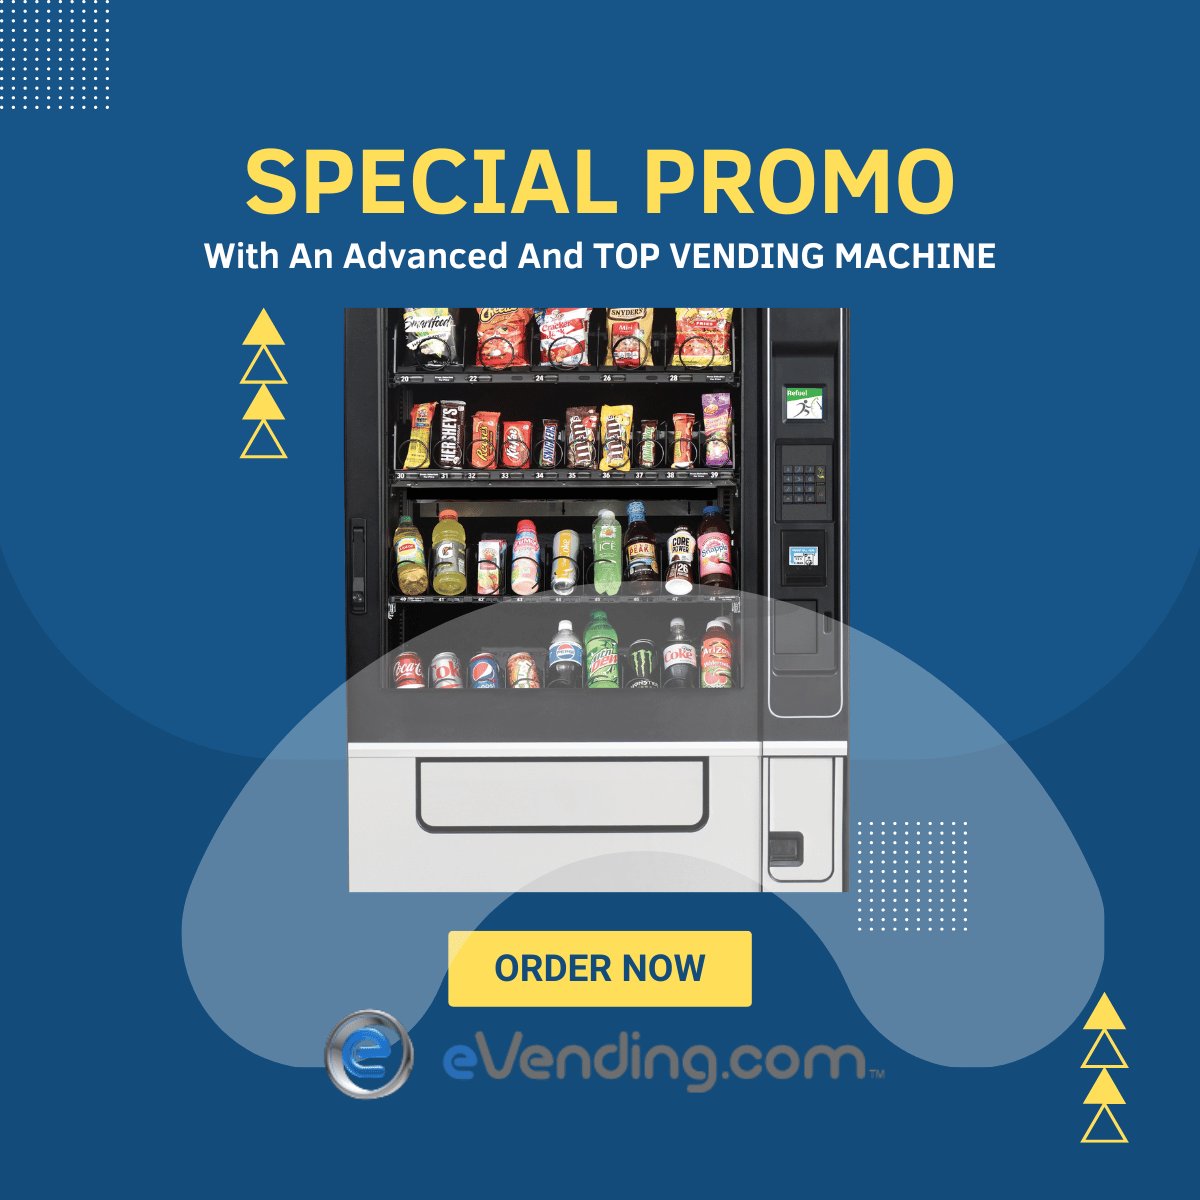 A TABLE TOP VENDING MACHINE IS PERFECT FOR YOUR BREAK ROOM